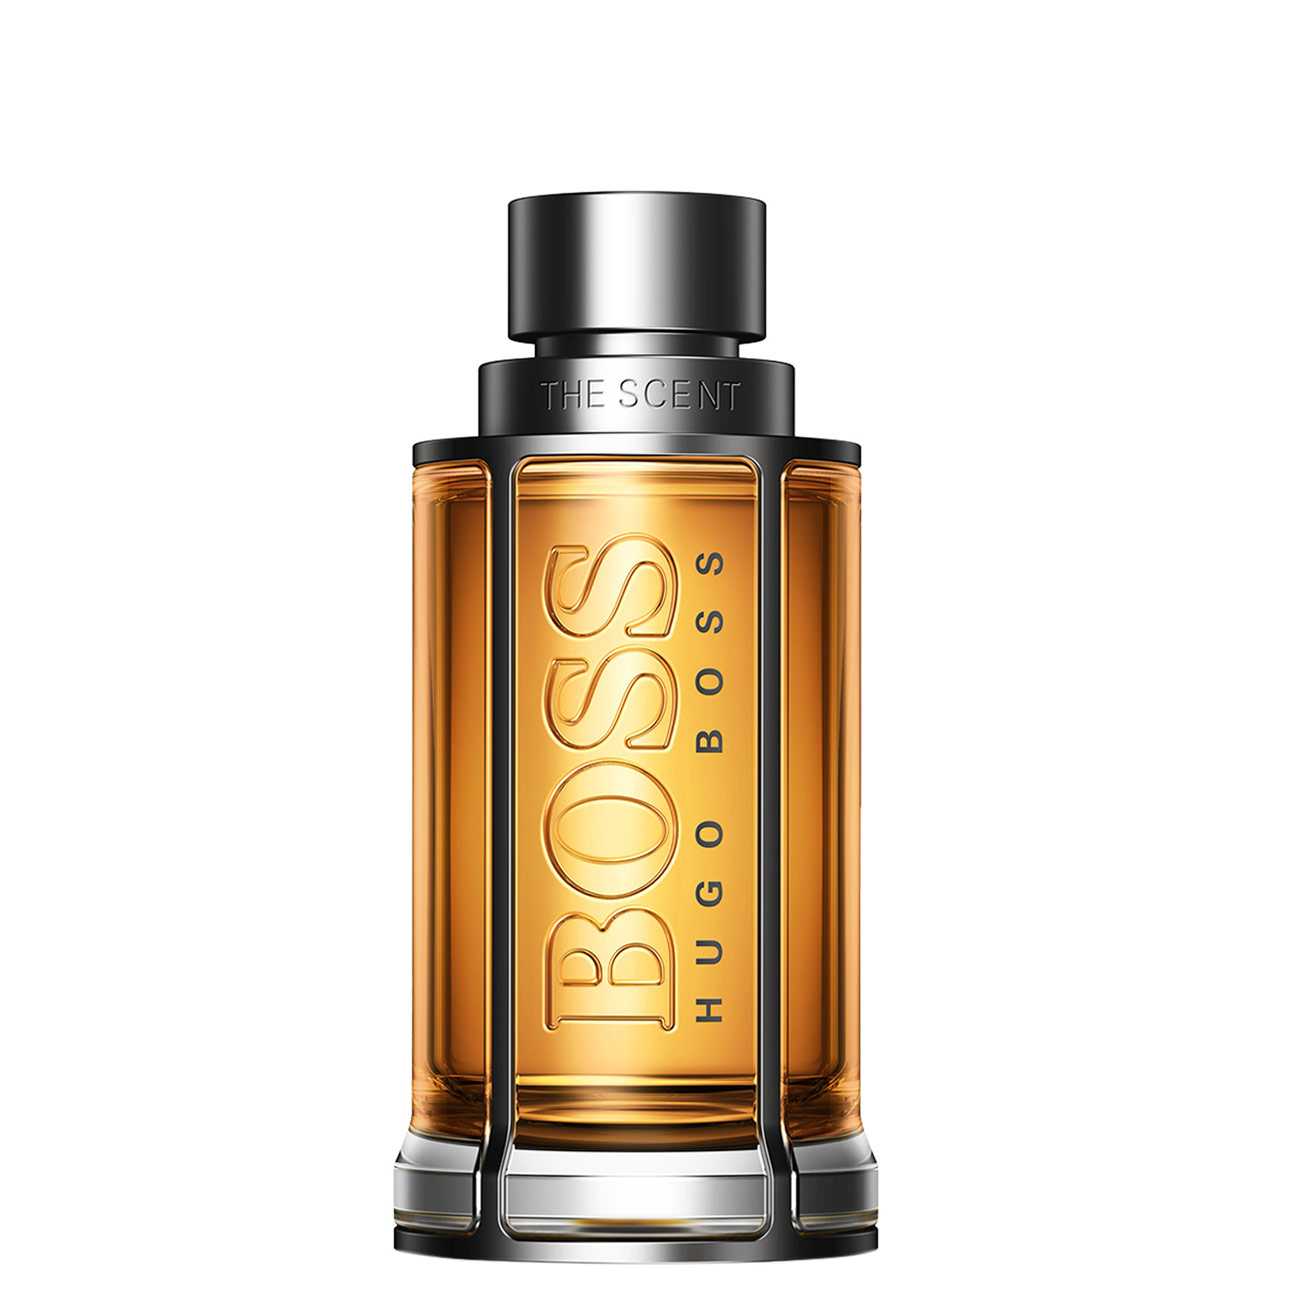 THE SCENT 100ml